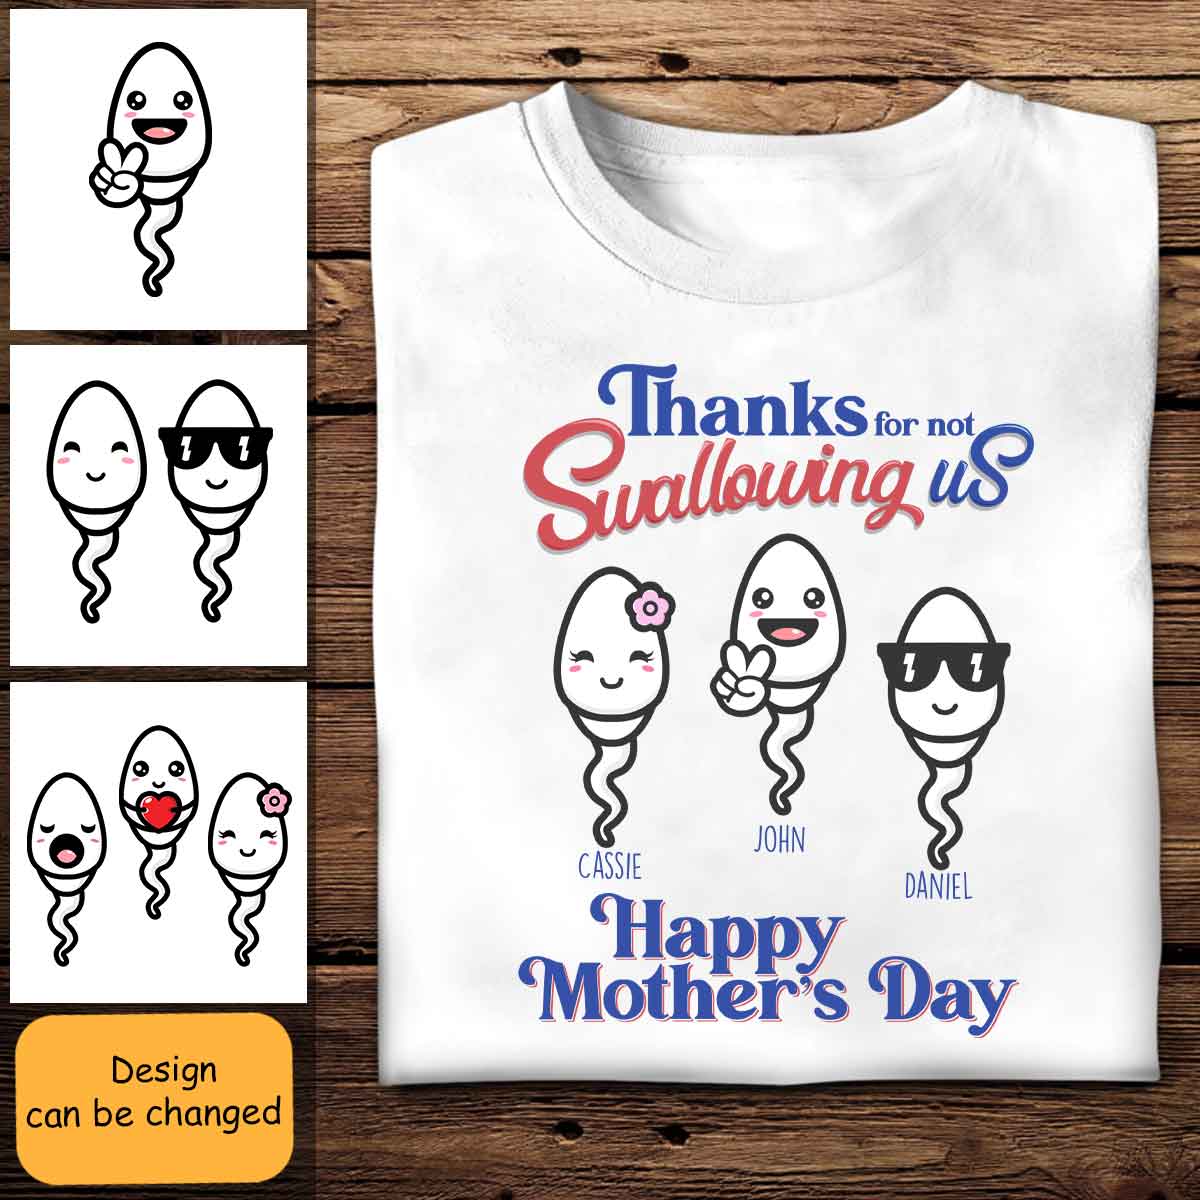 Thanks For Not Swallowing Us - Personalized Shirt -Gift For Mom